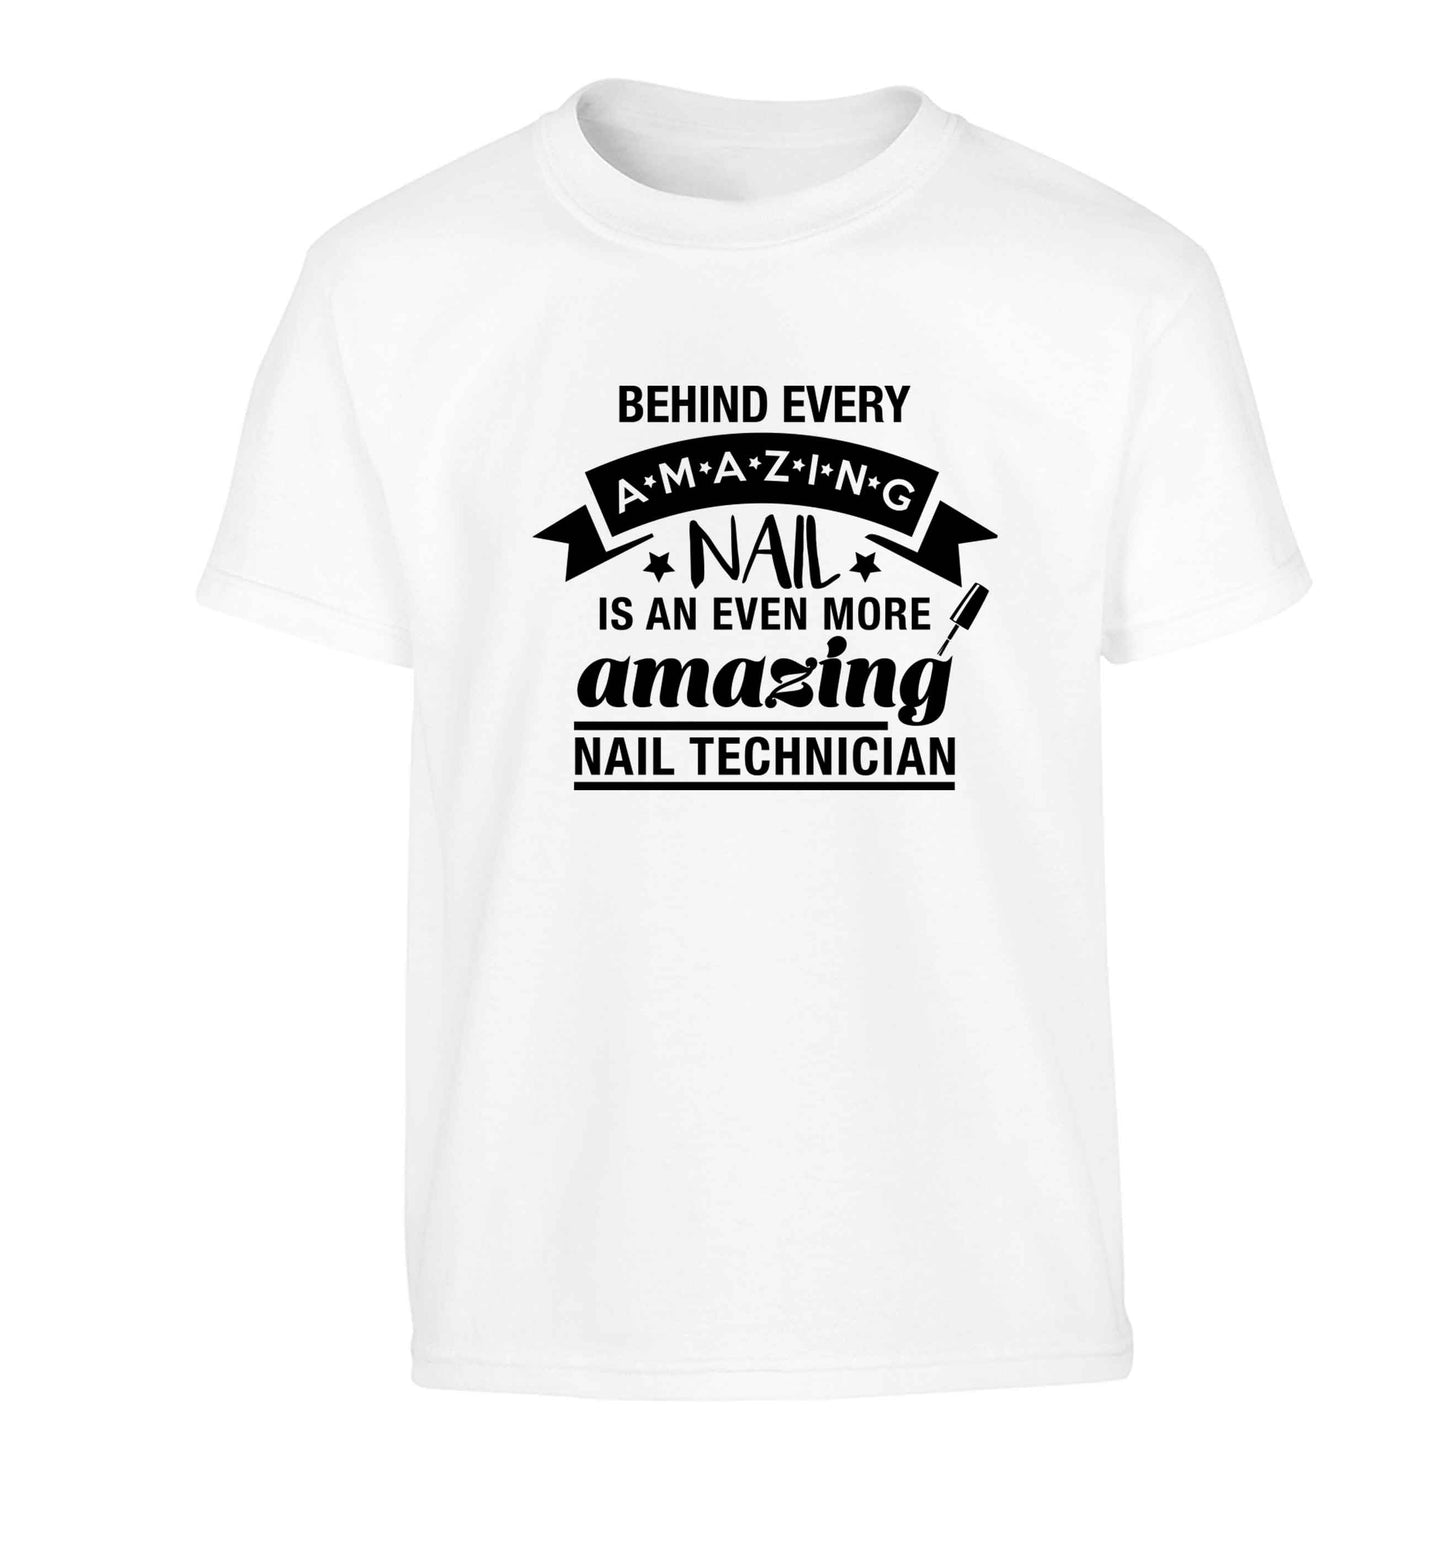 Behind every amazing nail is an even more amazing nail technician Children's white Tshirt 12-13 Years